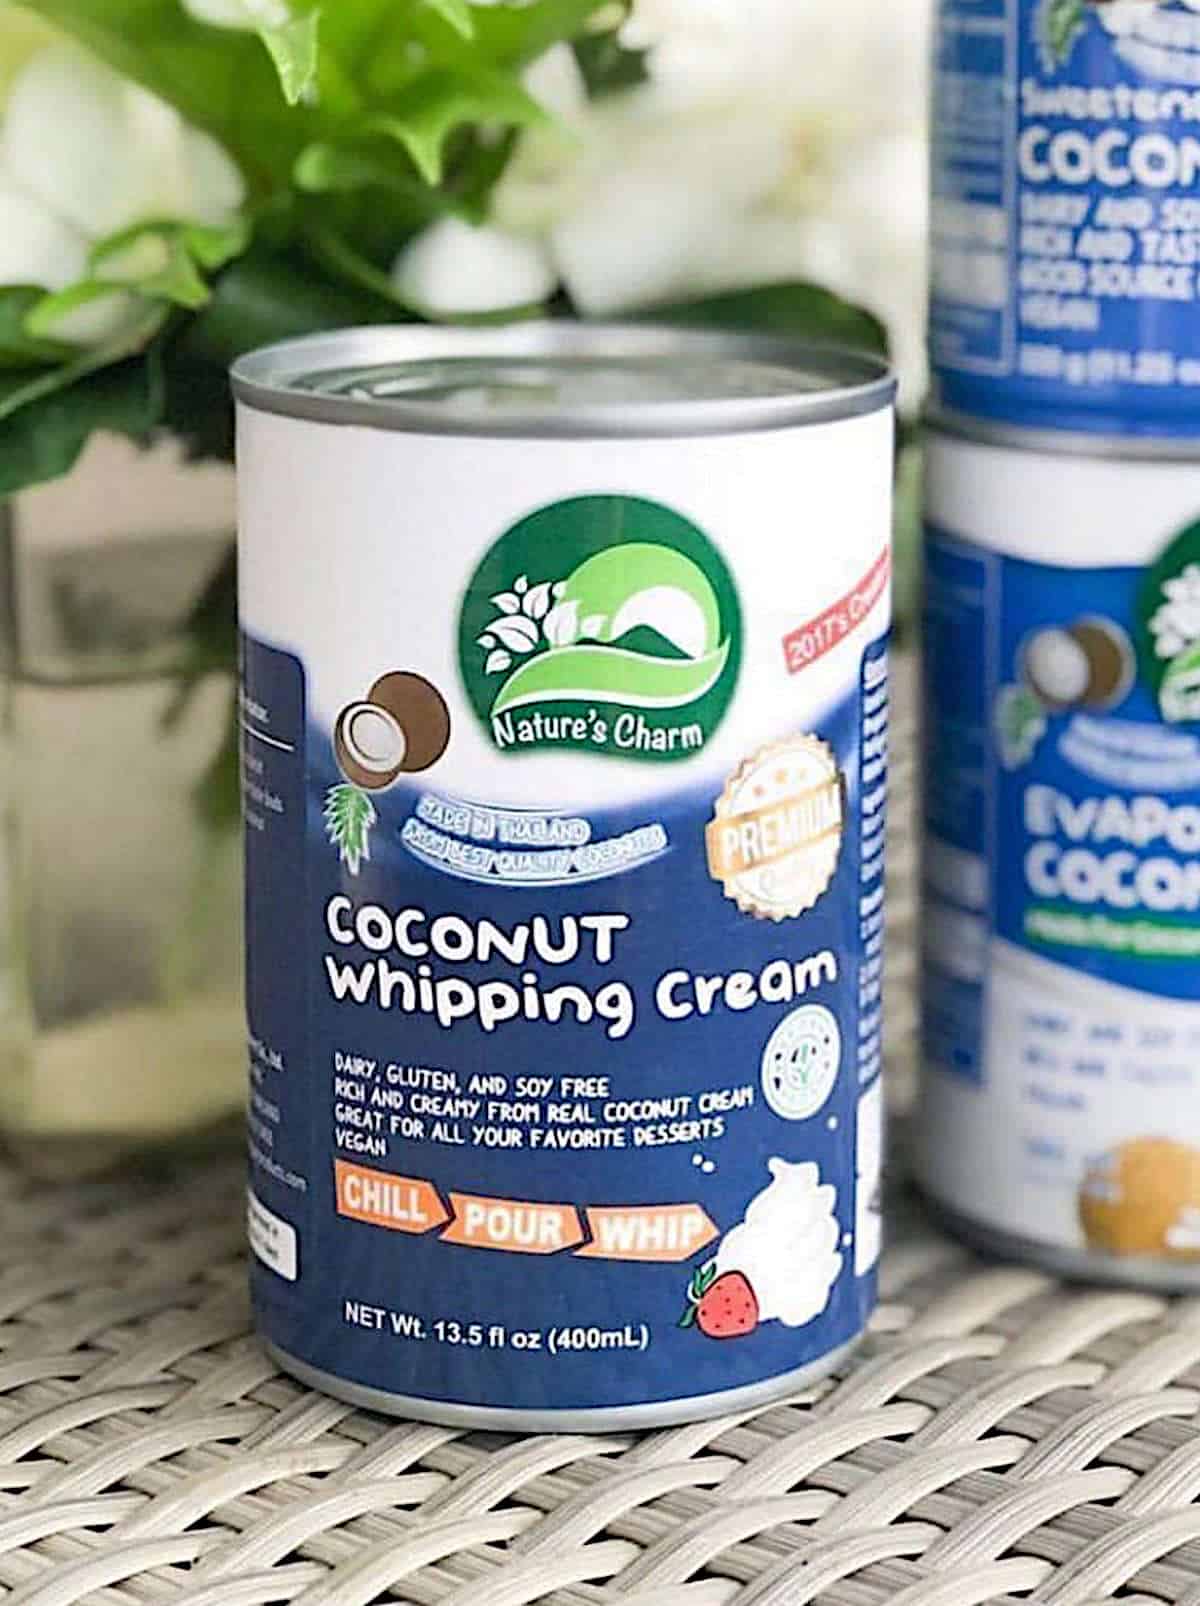 A can of Nature's Charm Coconut Whipping Cream on a weaved mat with flowers in the background.